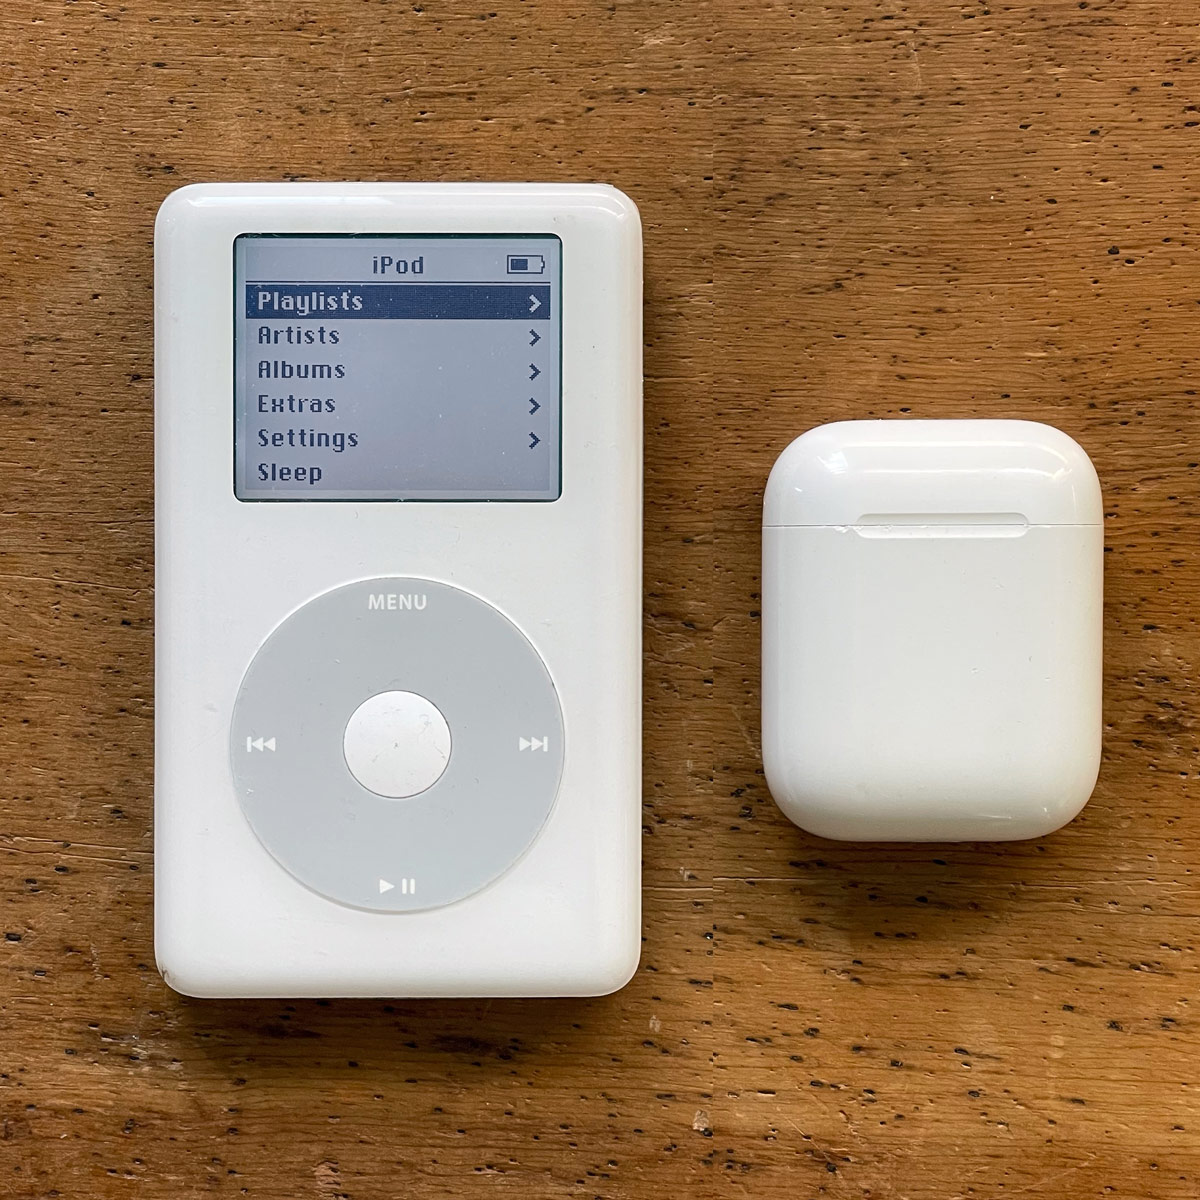 iPod 4G Airpods Apple